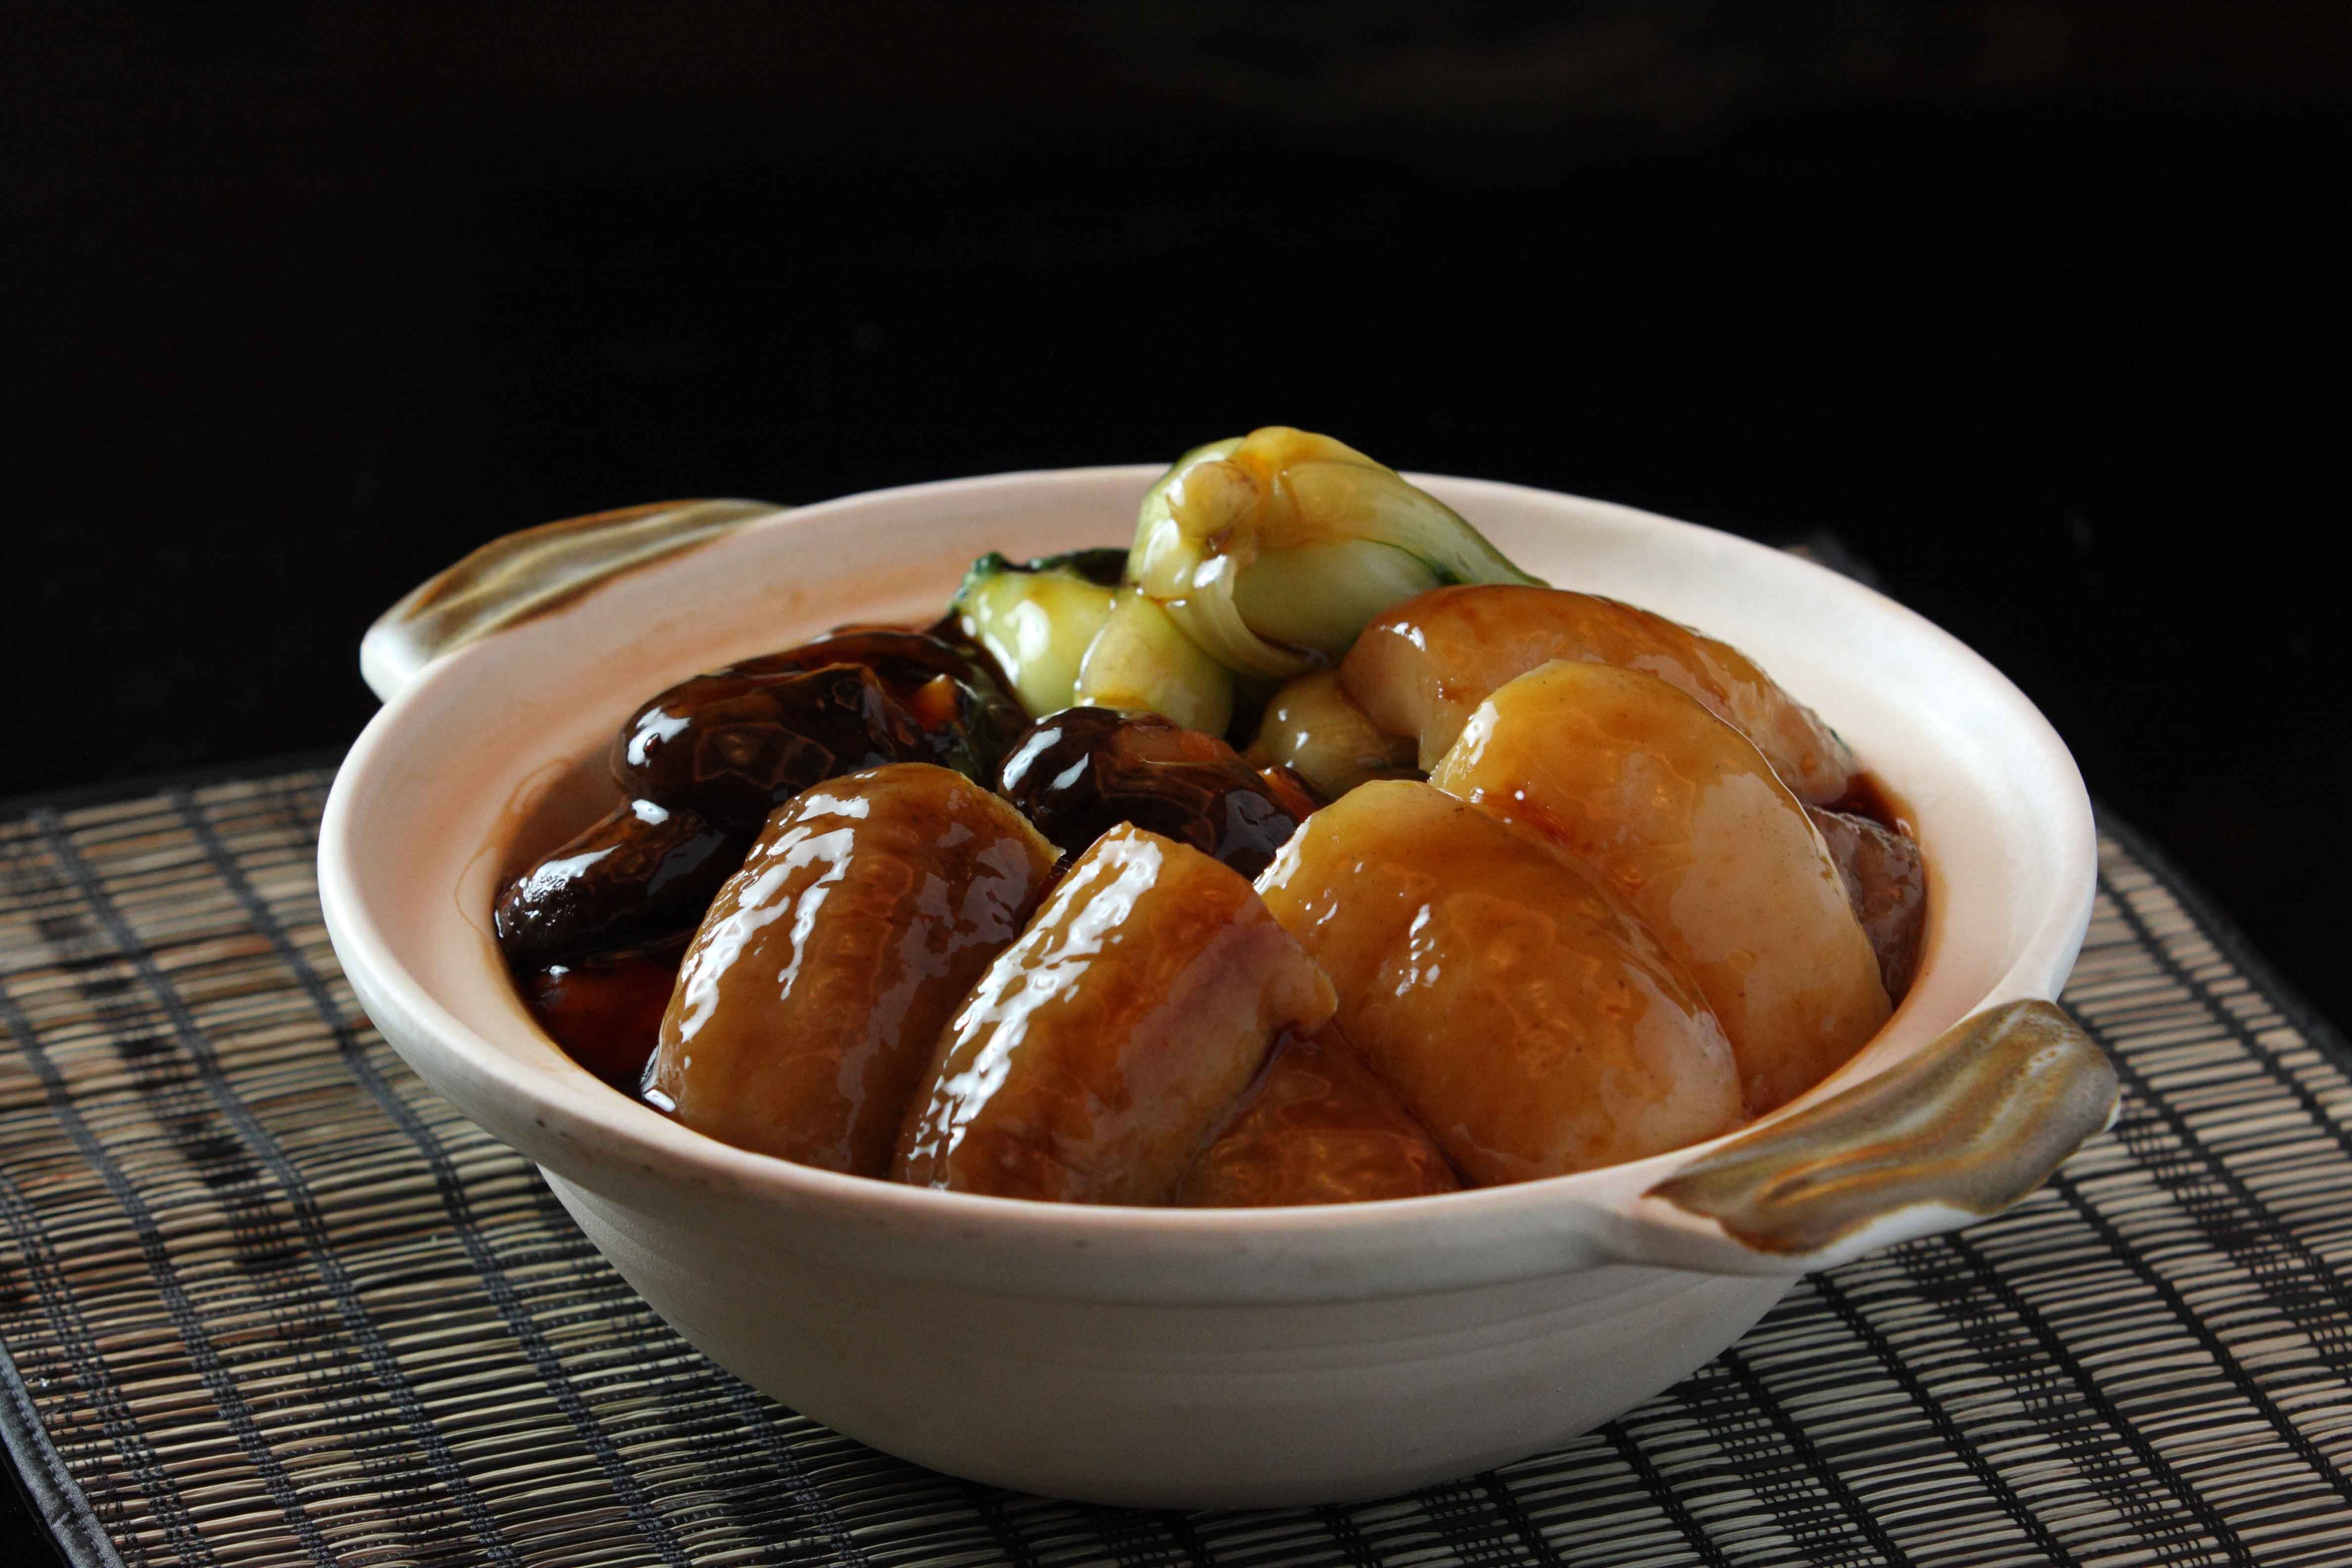 Braised Sea Cucumber, Chinese New Year Dishes, Lunar New Year Dishes